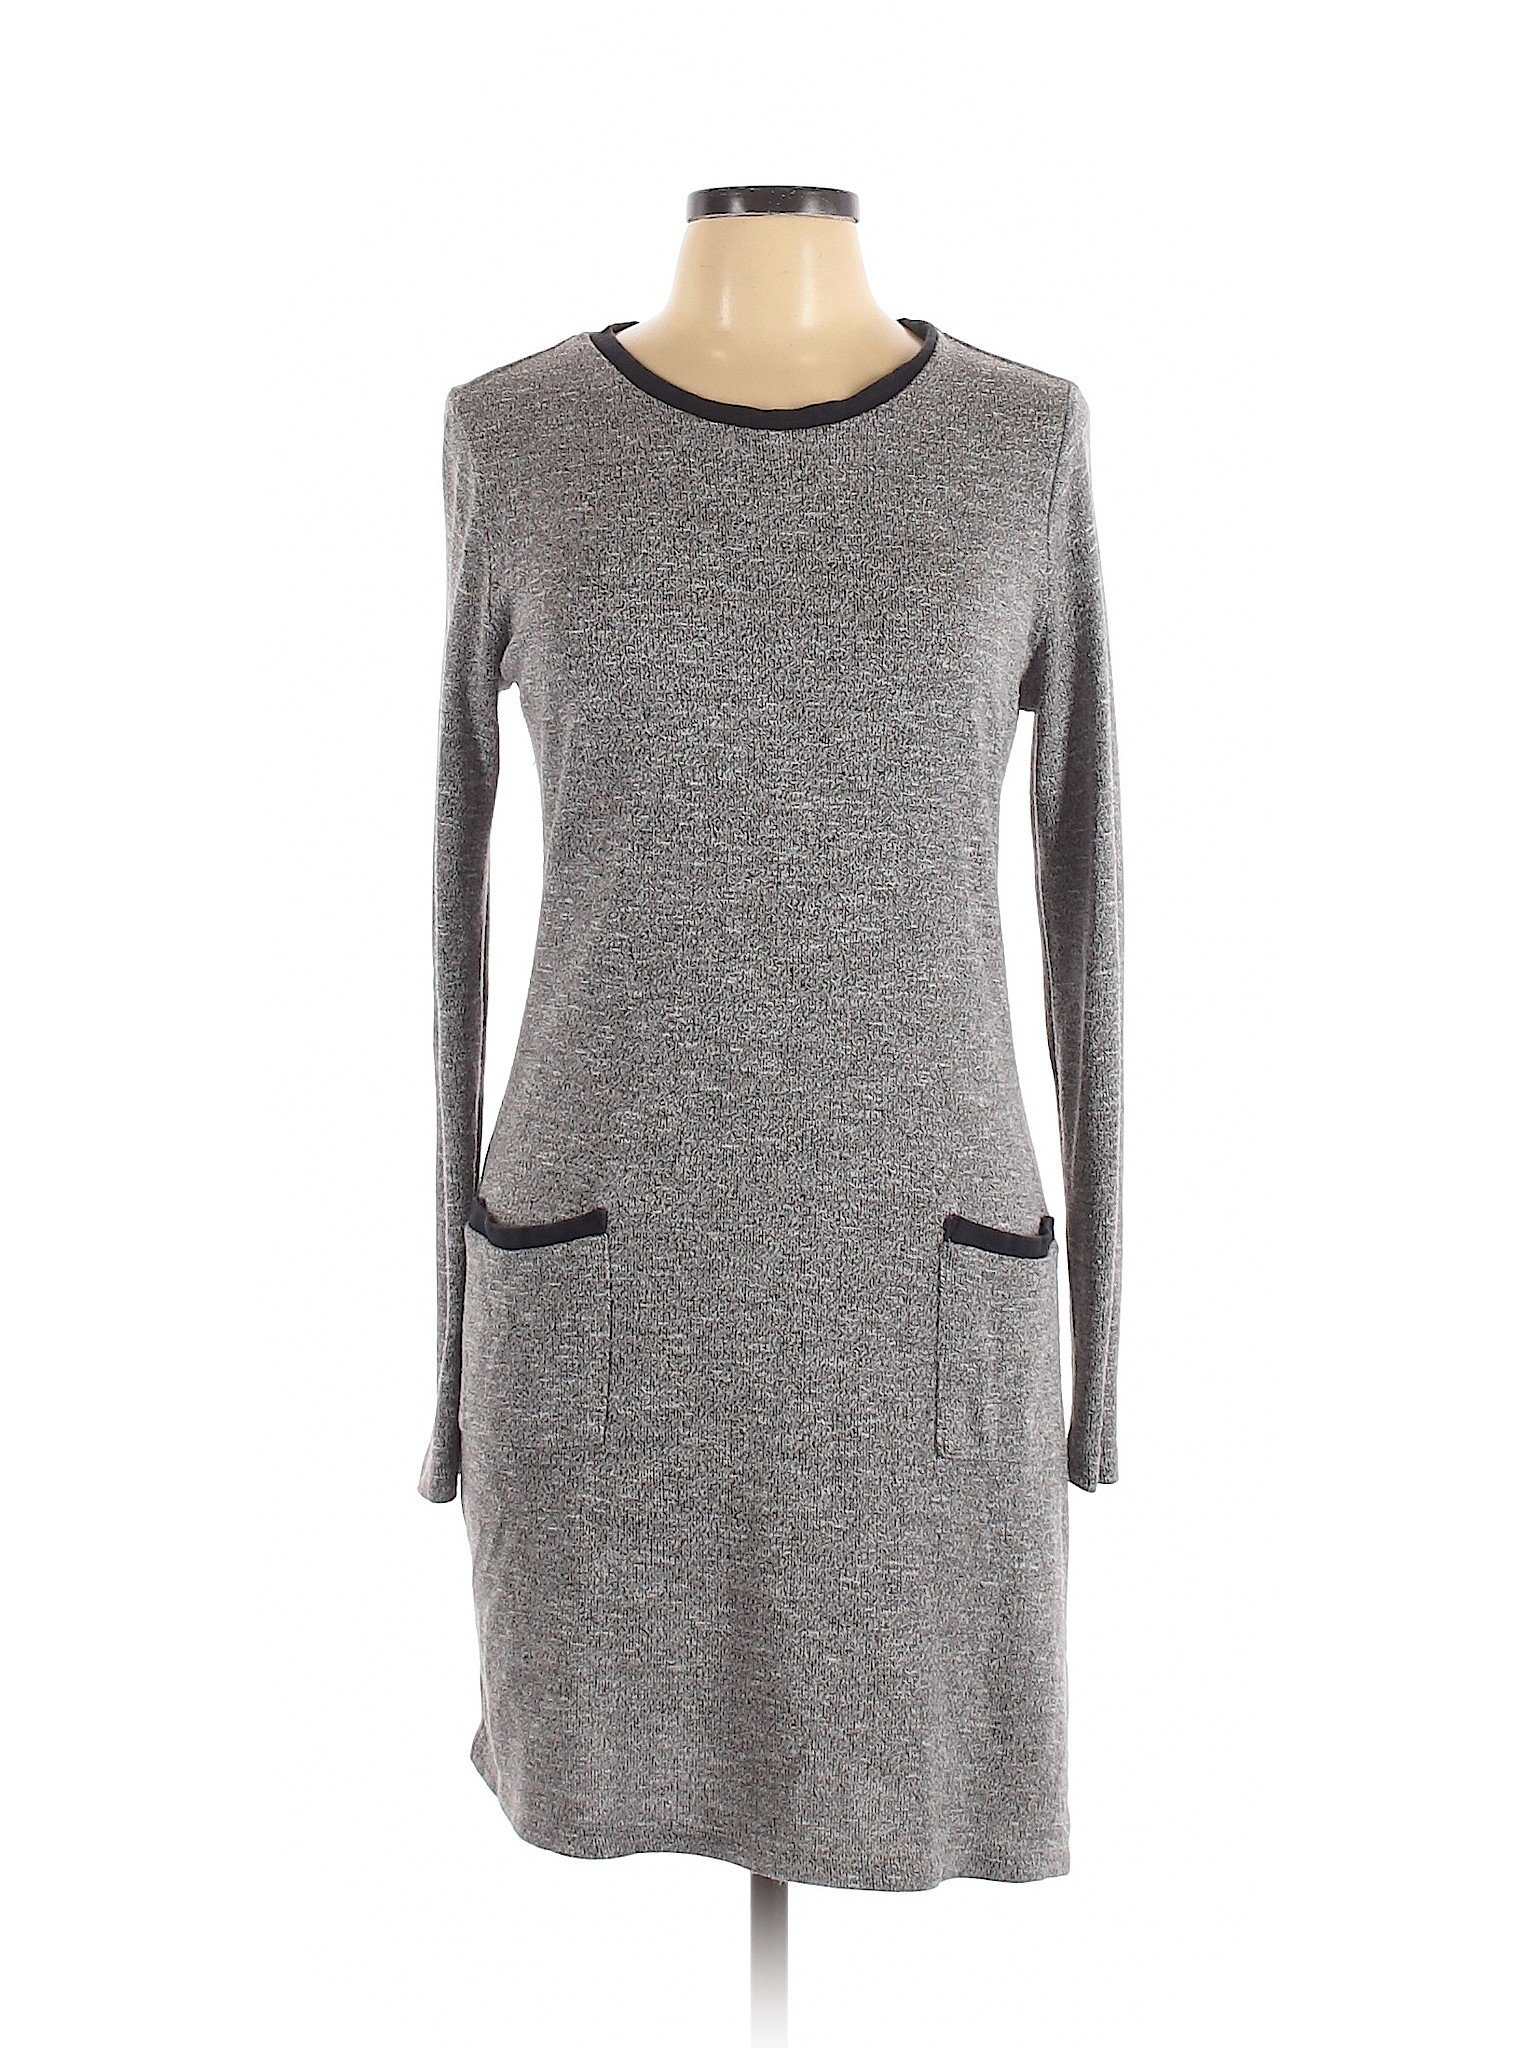 Summer and Sage Women Gray Casual Dress L | eBay